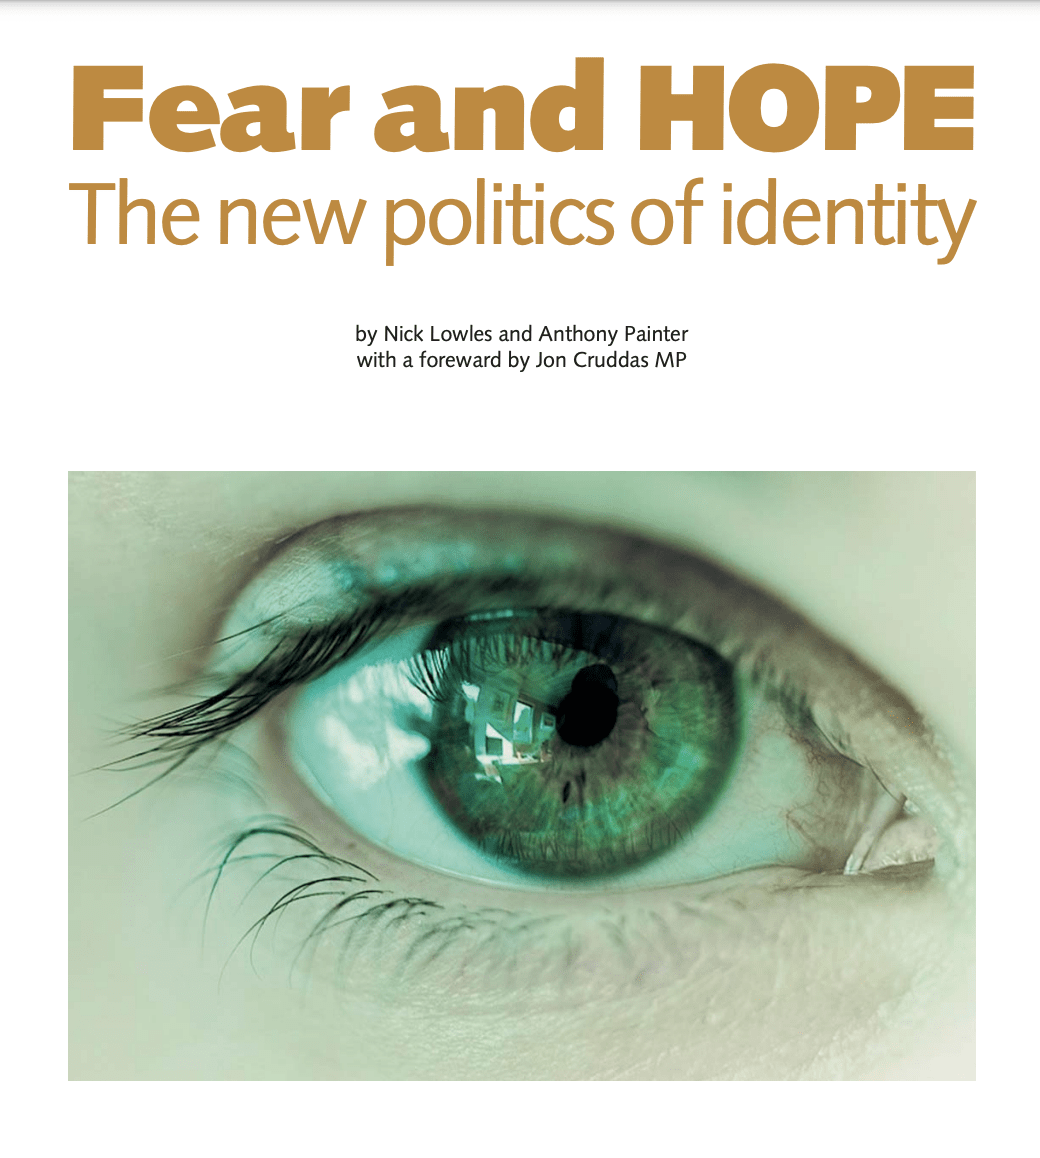 Fear and HOPE: The new politics of identity